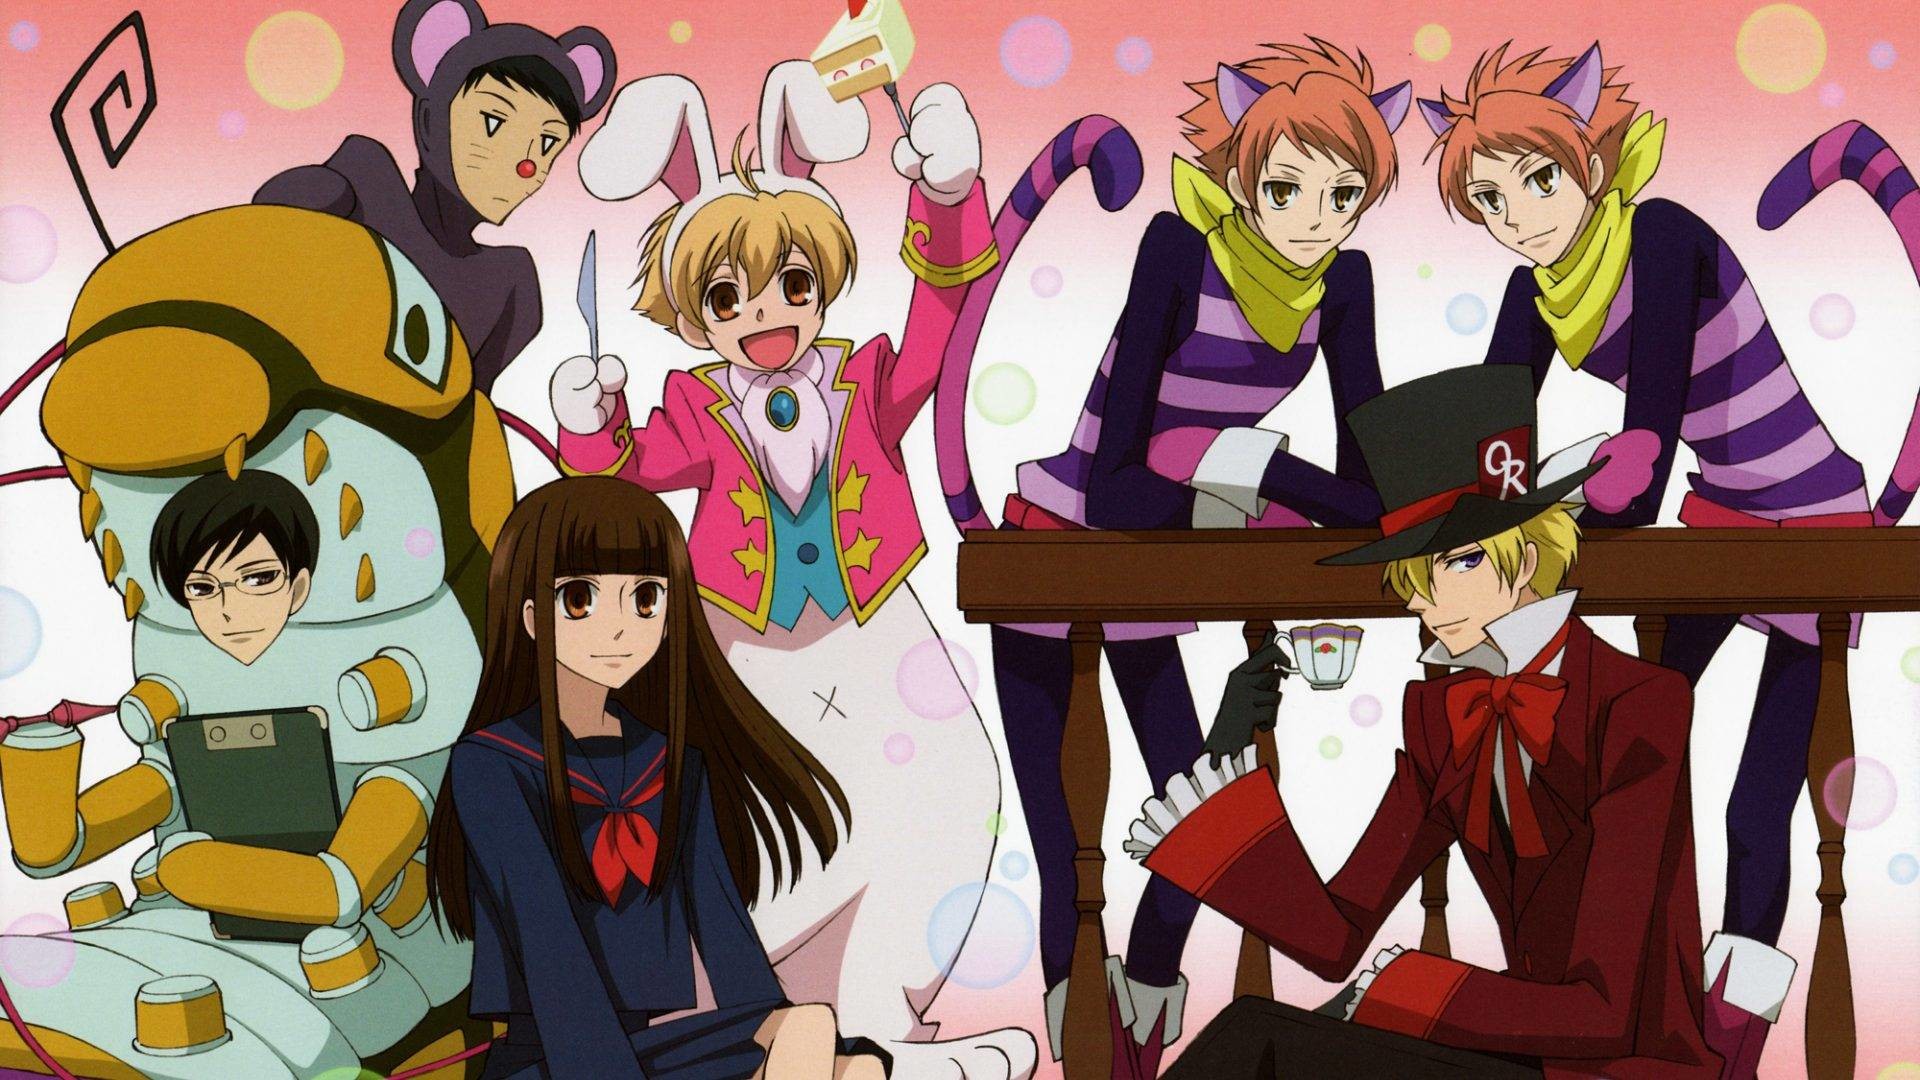 1920x1080 47 Ouran High School Host Club HD Wallpapers | Backgrounds .